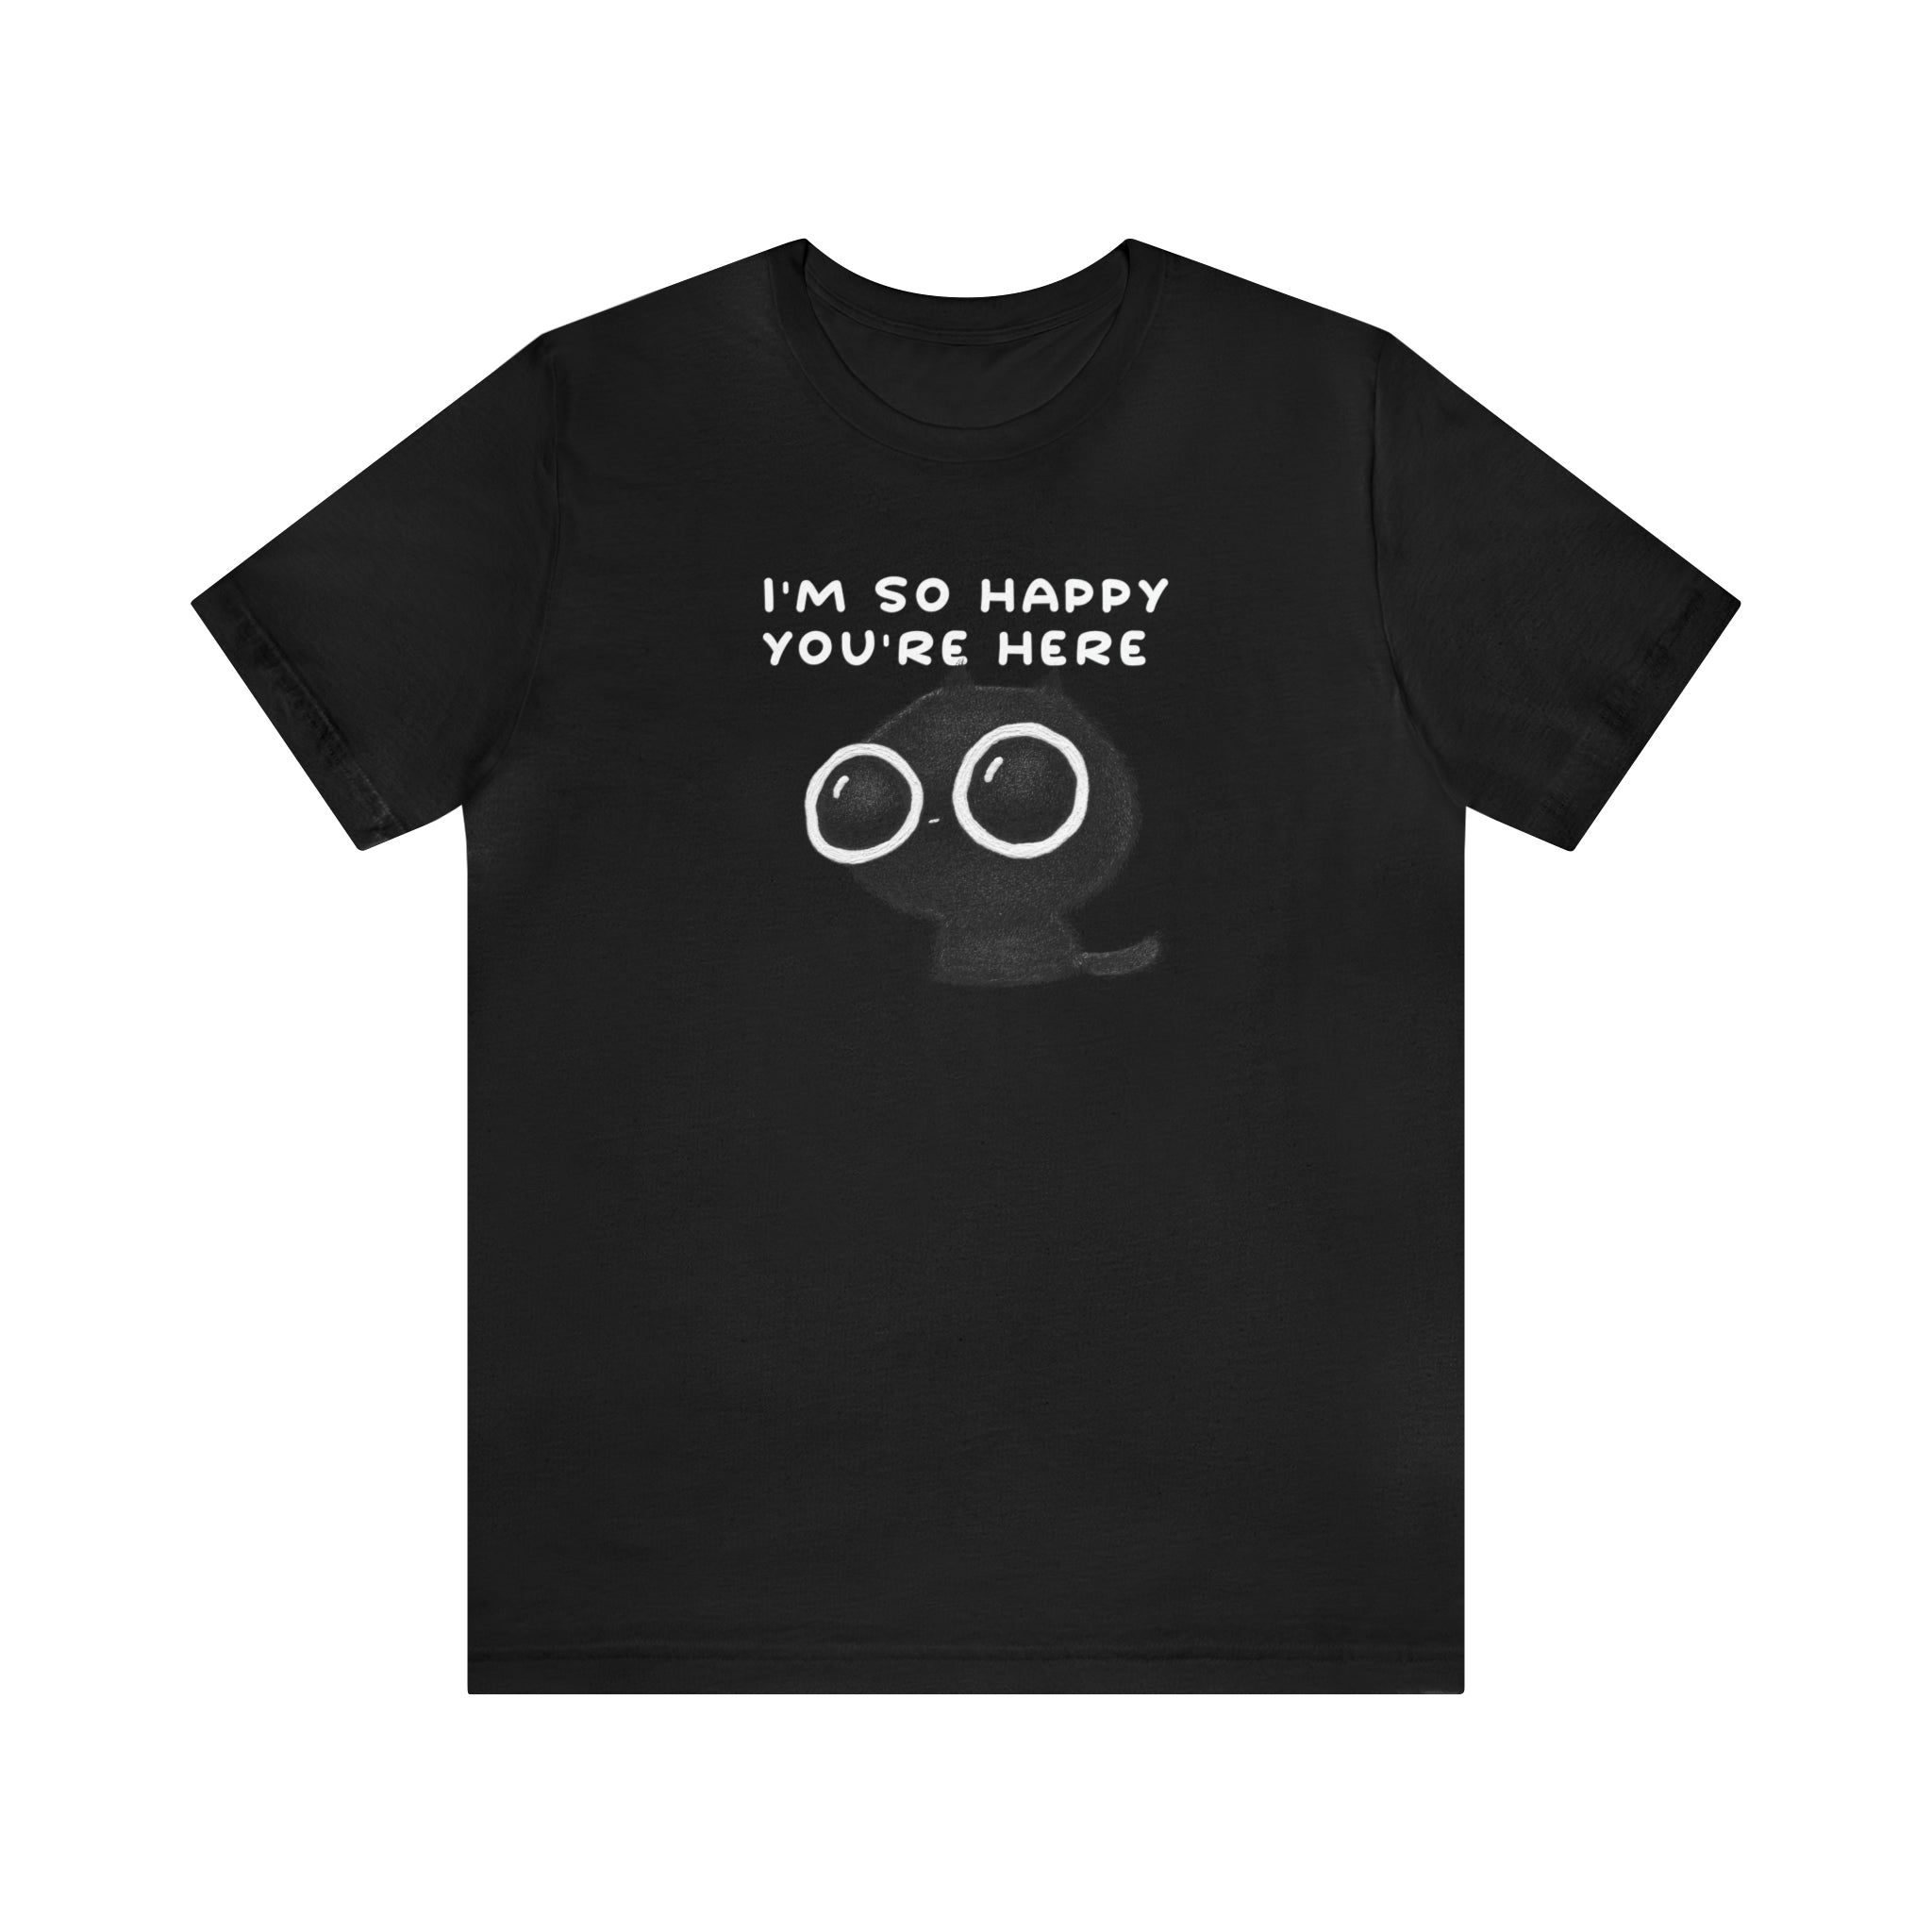 I'm So Happy You're Here : Unisex 100% Comfy Cotton, T-Shirt by Bella+Canvas